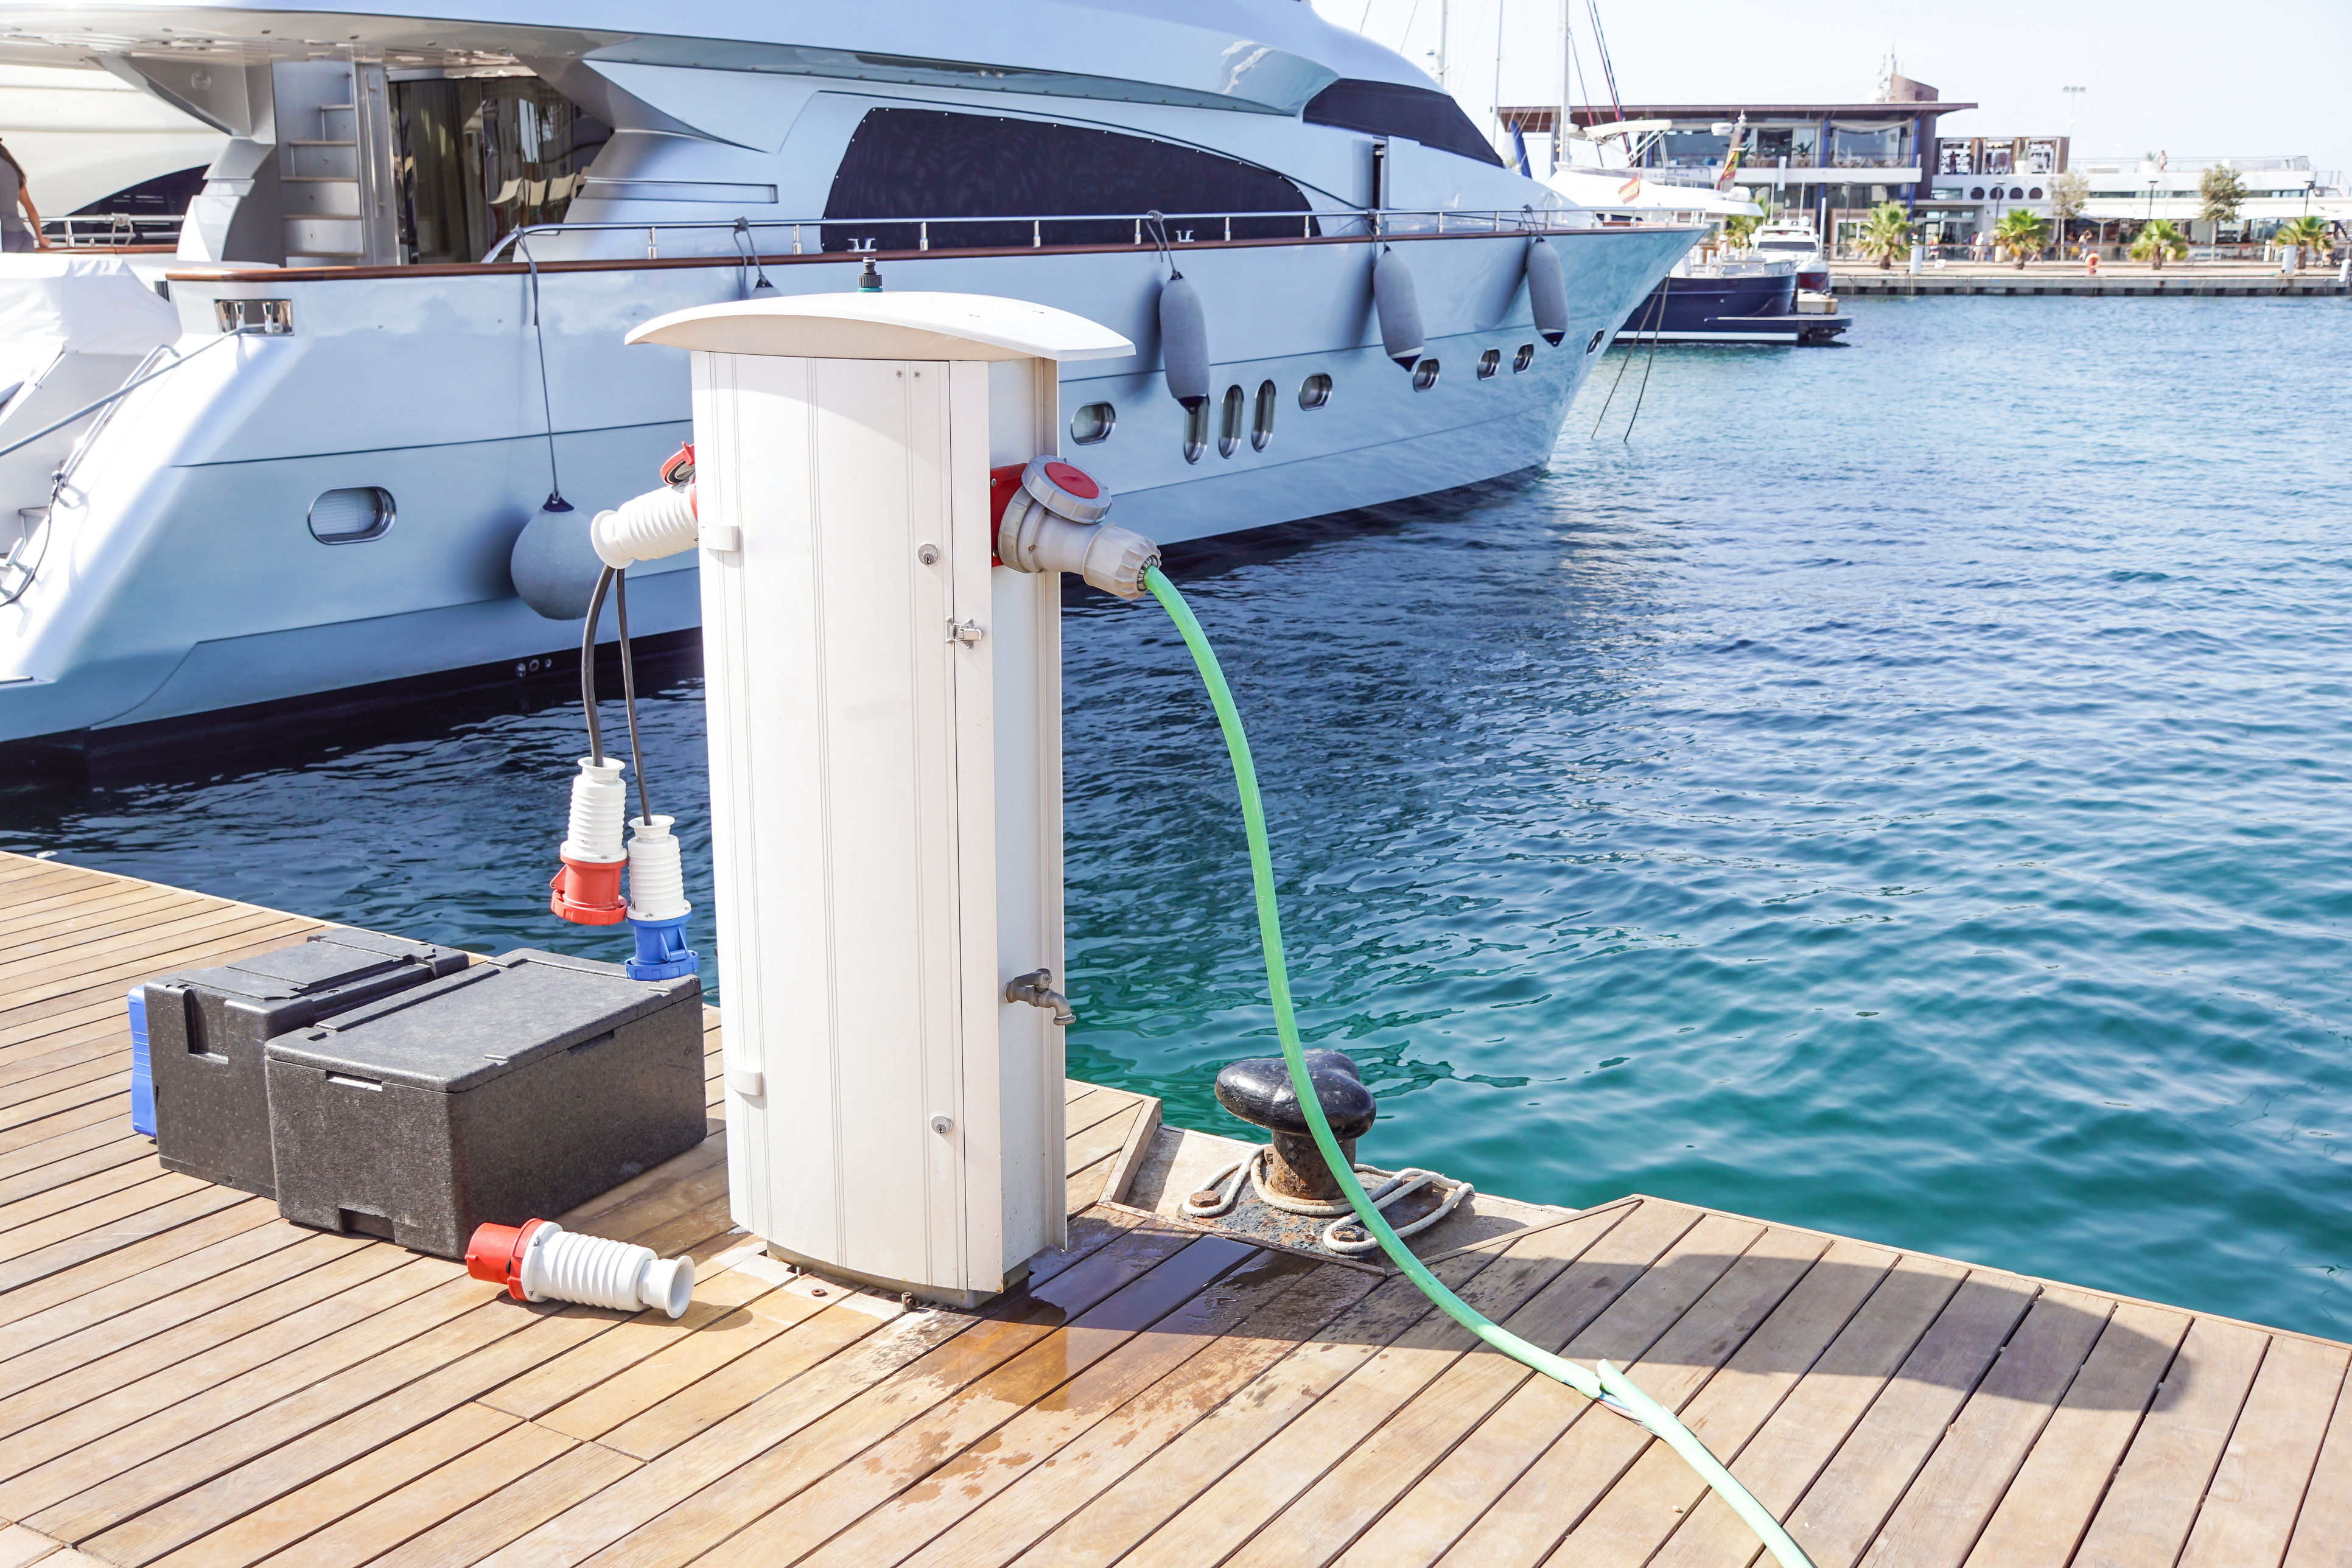 Boat fueling is no problem at all with Boaters List!